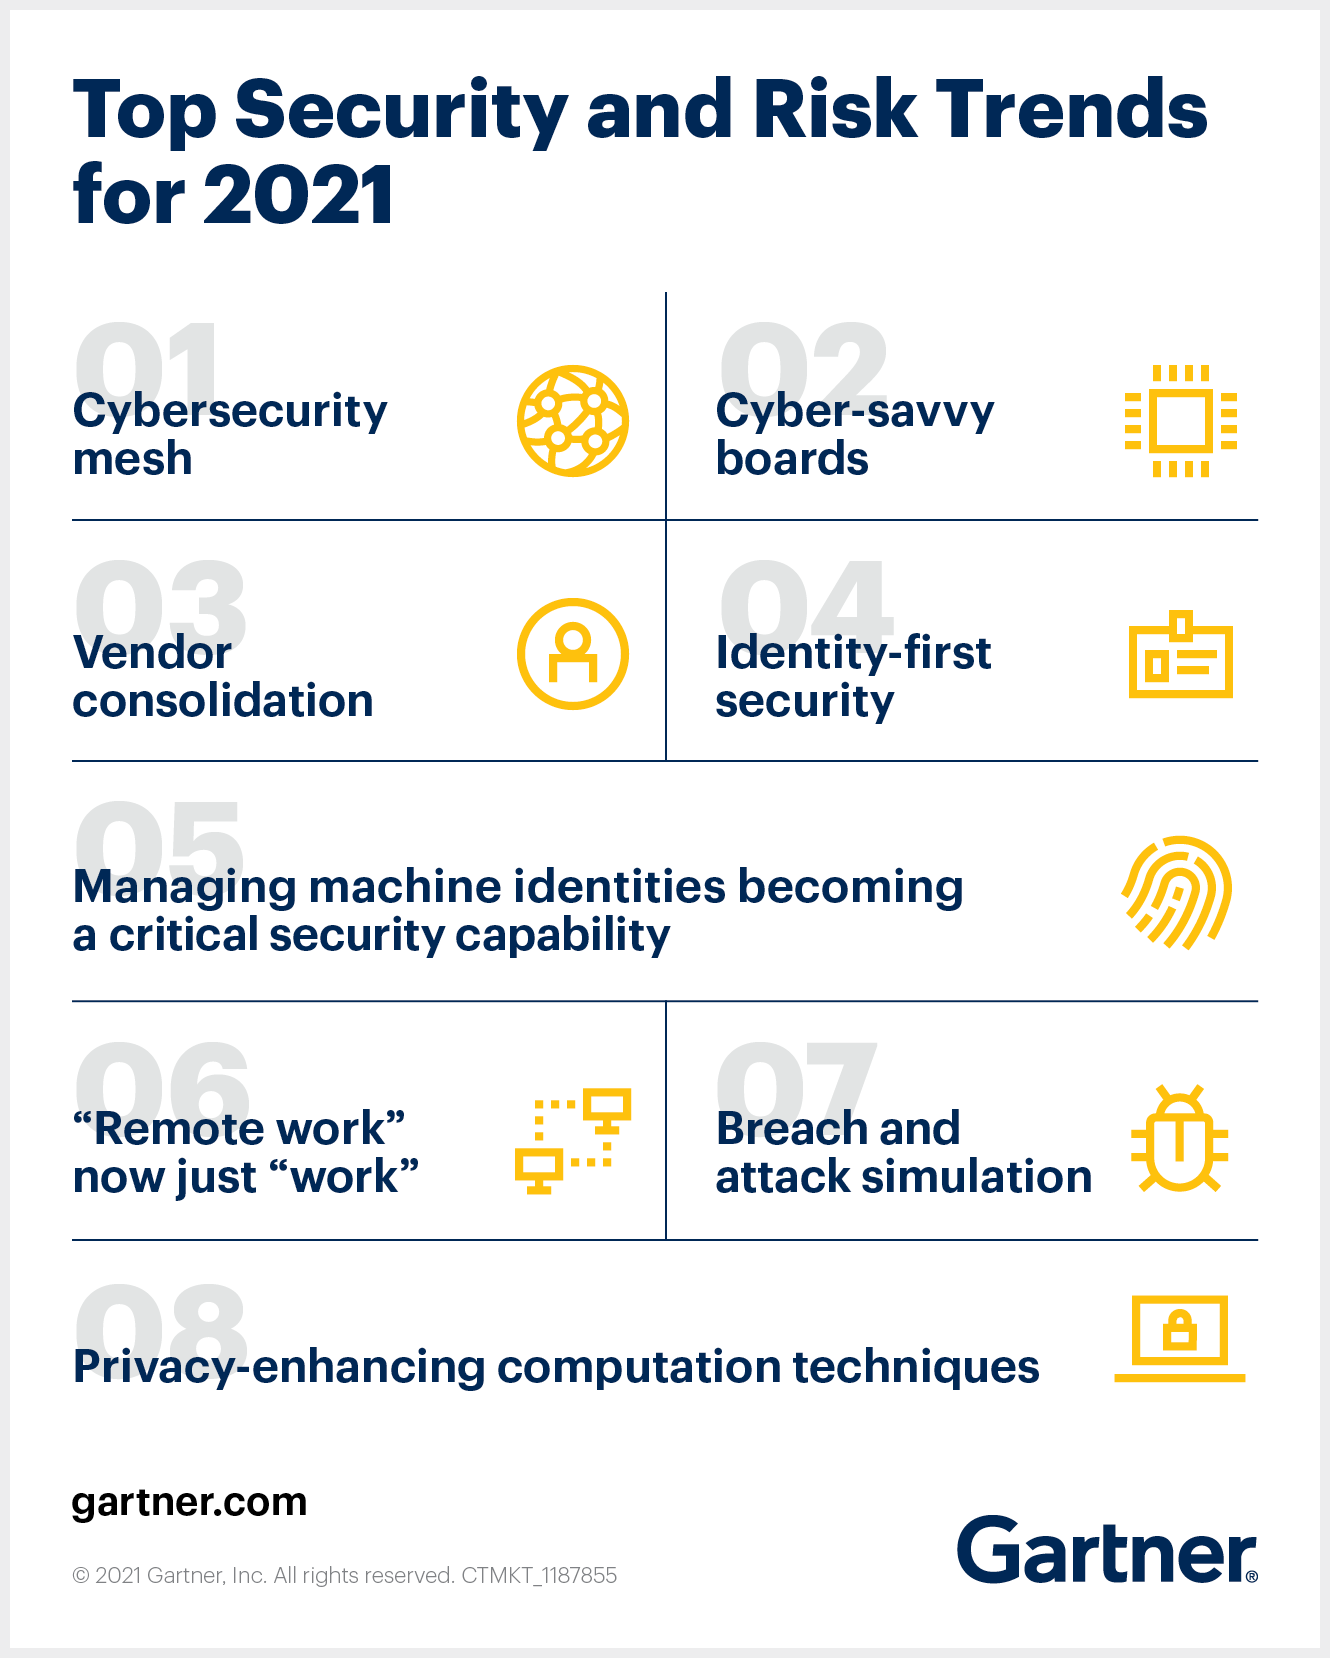 The top 8 Gartner security and risk trends for 2021.